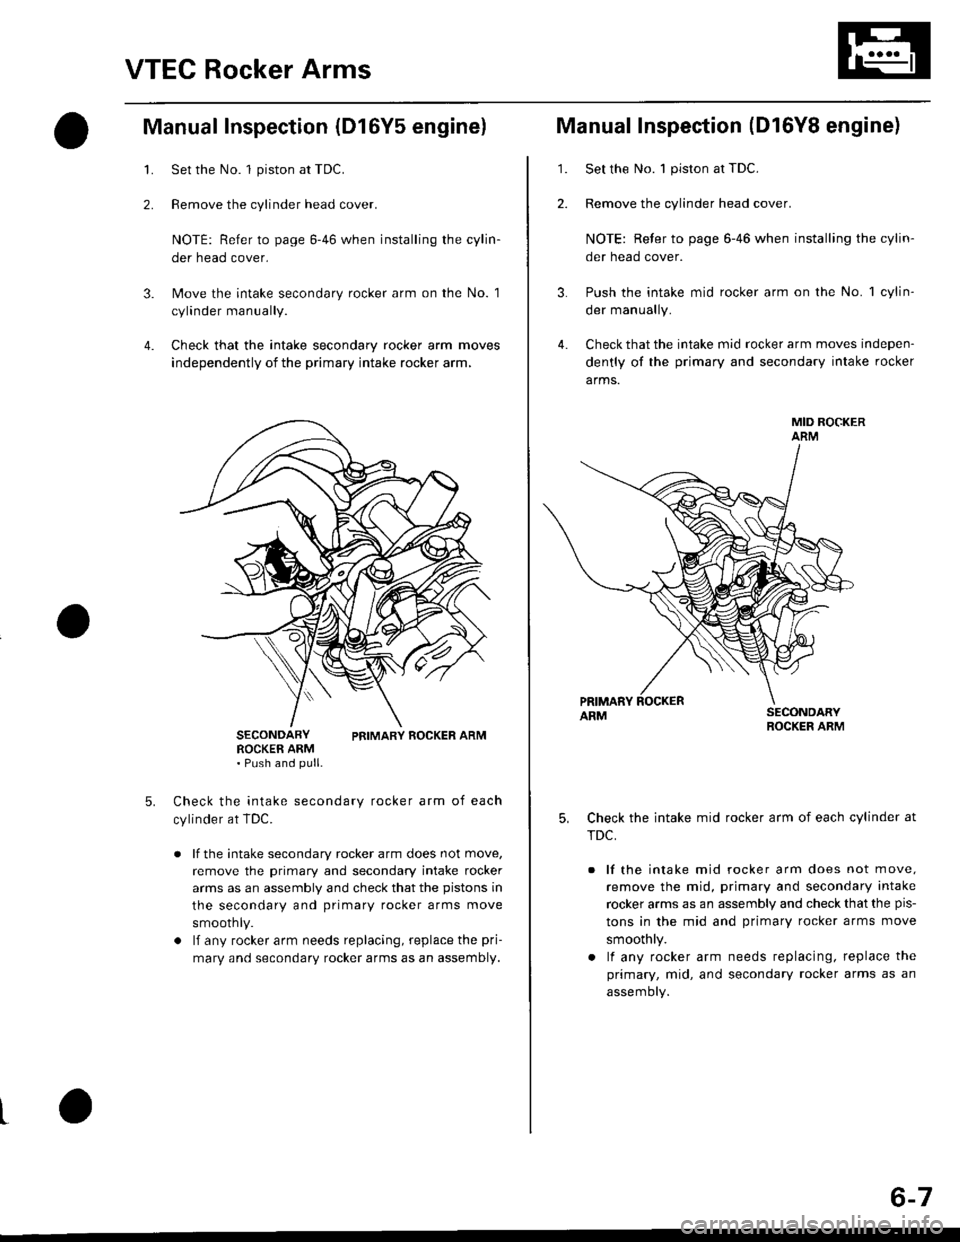 HONDA CIVIC 1999 6.G Workshop Manual VTEC Rocker Arms
2.
Manual Inspection (D16Y5 engine)
3.
1.
4.
Set the No. 1 piston at TDC.
Remove the cylinder head cover.
NOTE: Refer to page 6-46 when installing the cylin-
der head cover.
Move the 